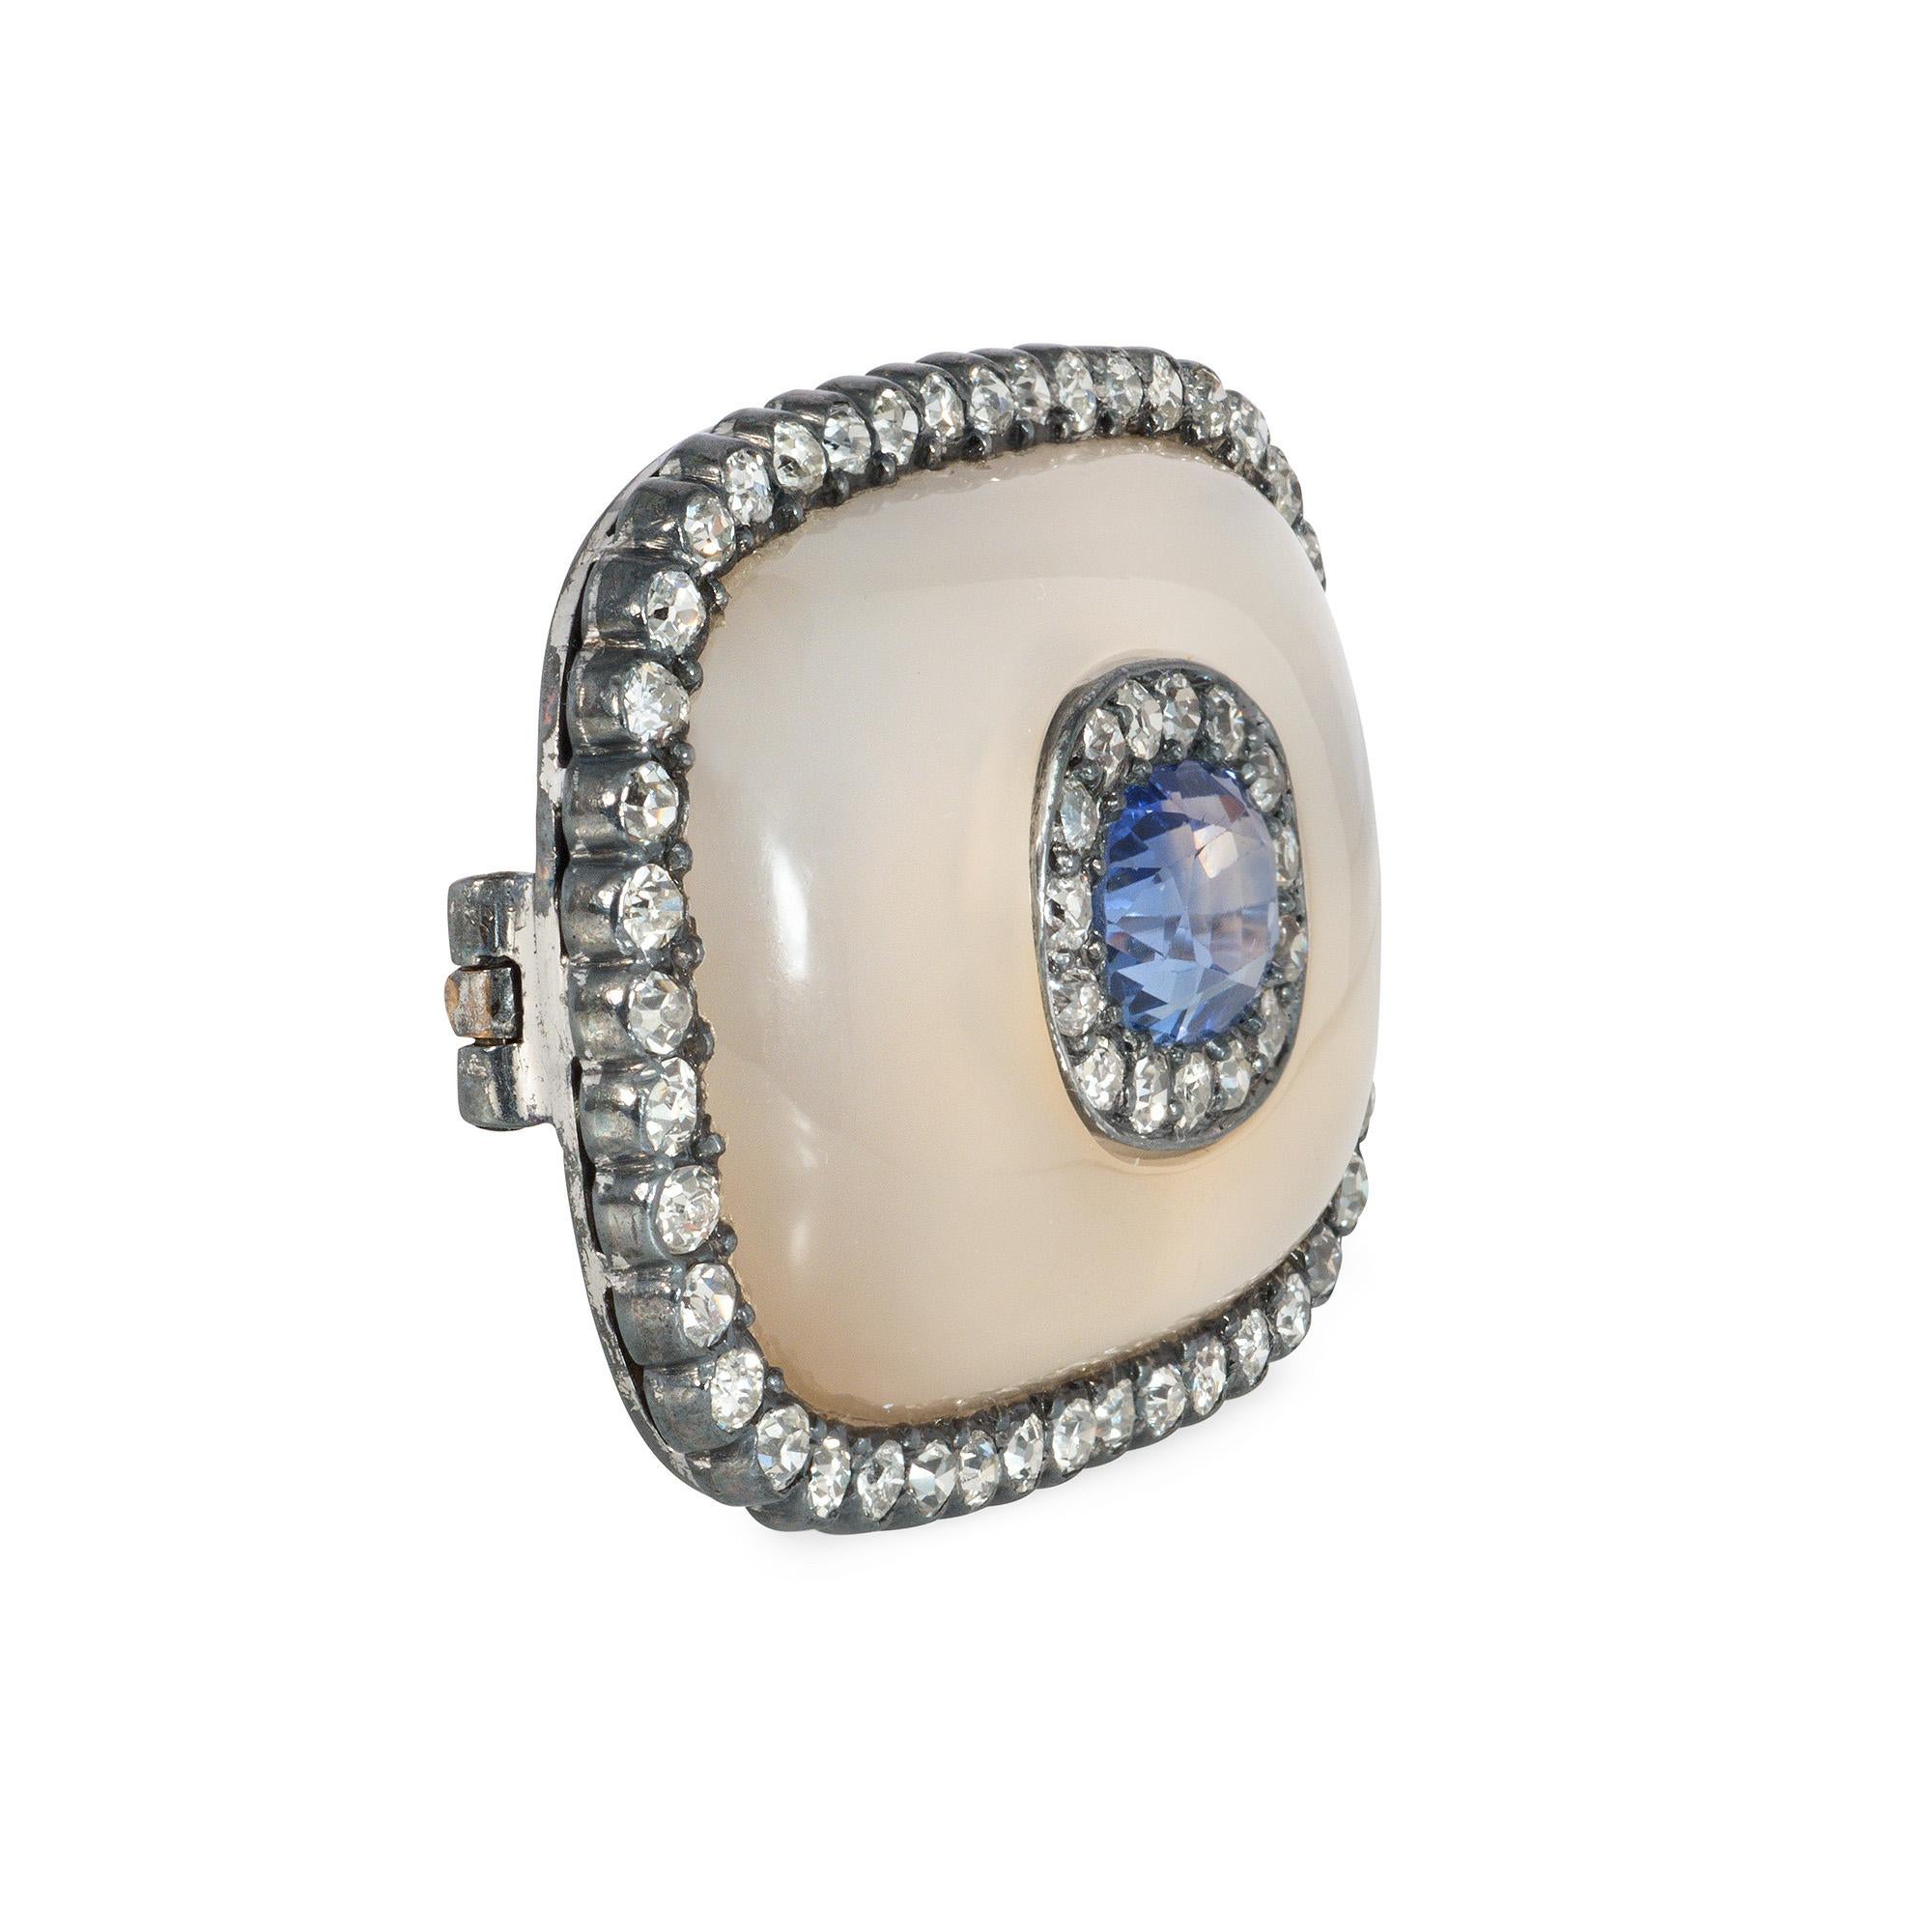 An antique sapphire, diamond, and chalcedony brooch of rounded rectangular form, centered by an oval Ceylon sapphire in a diamond surround, further set within a piece of carved chalcedony with a diamond border, in silver-topped gold.  Austria.  Atw